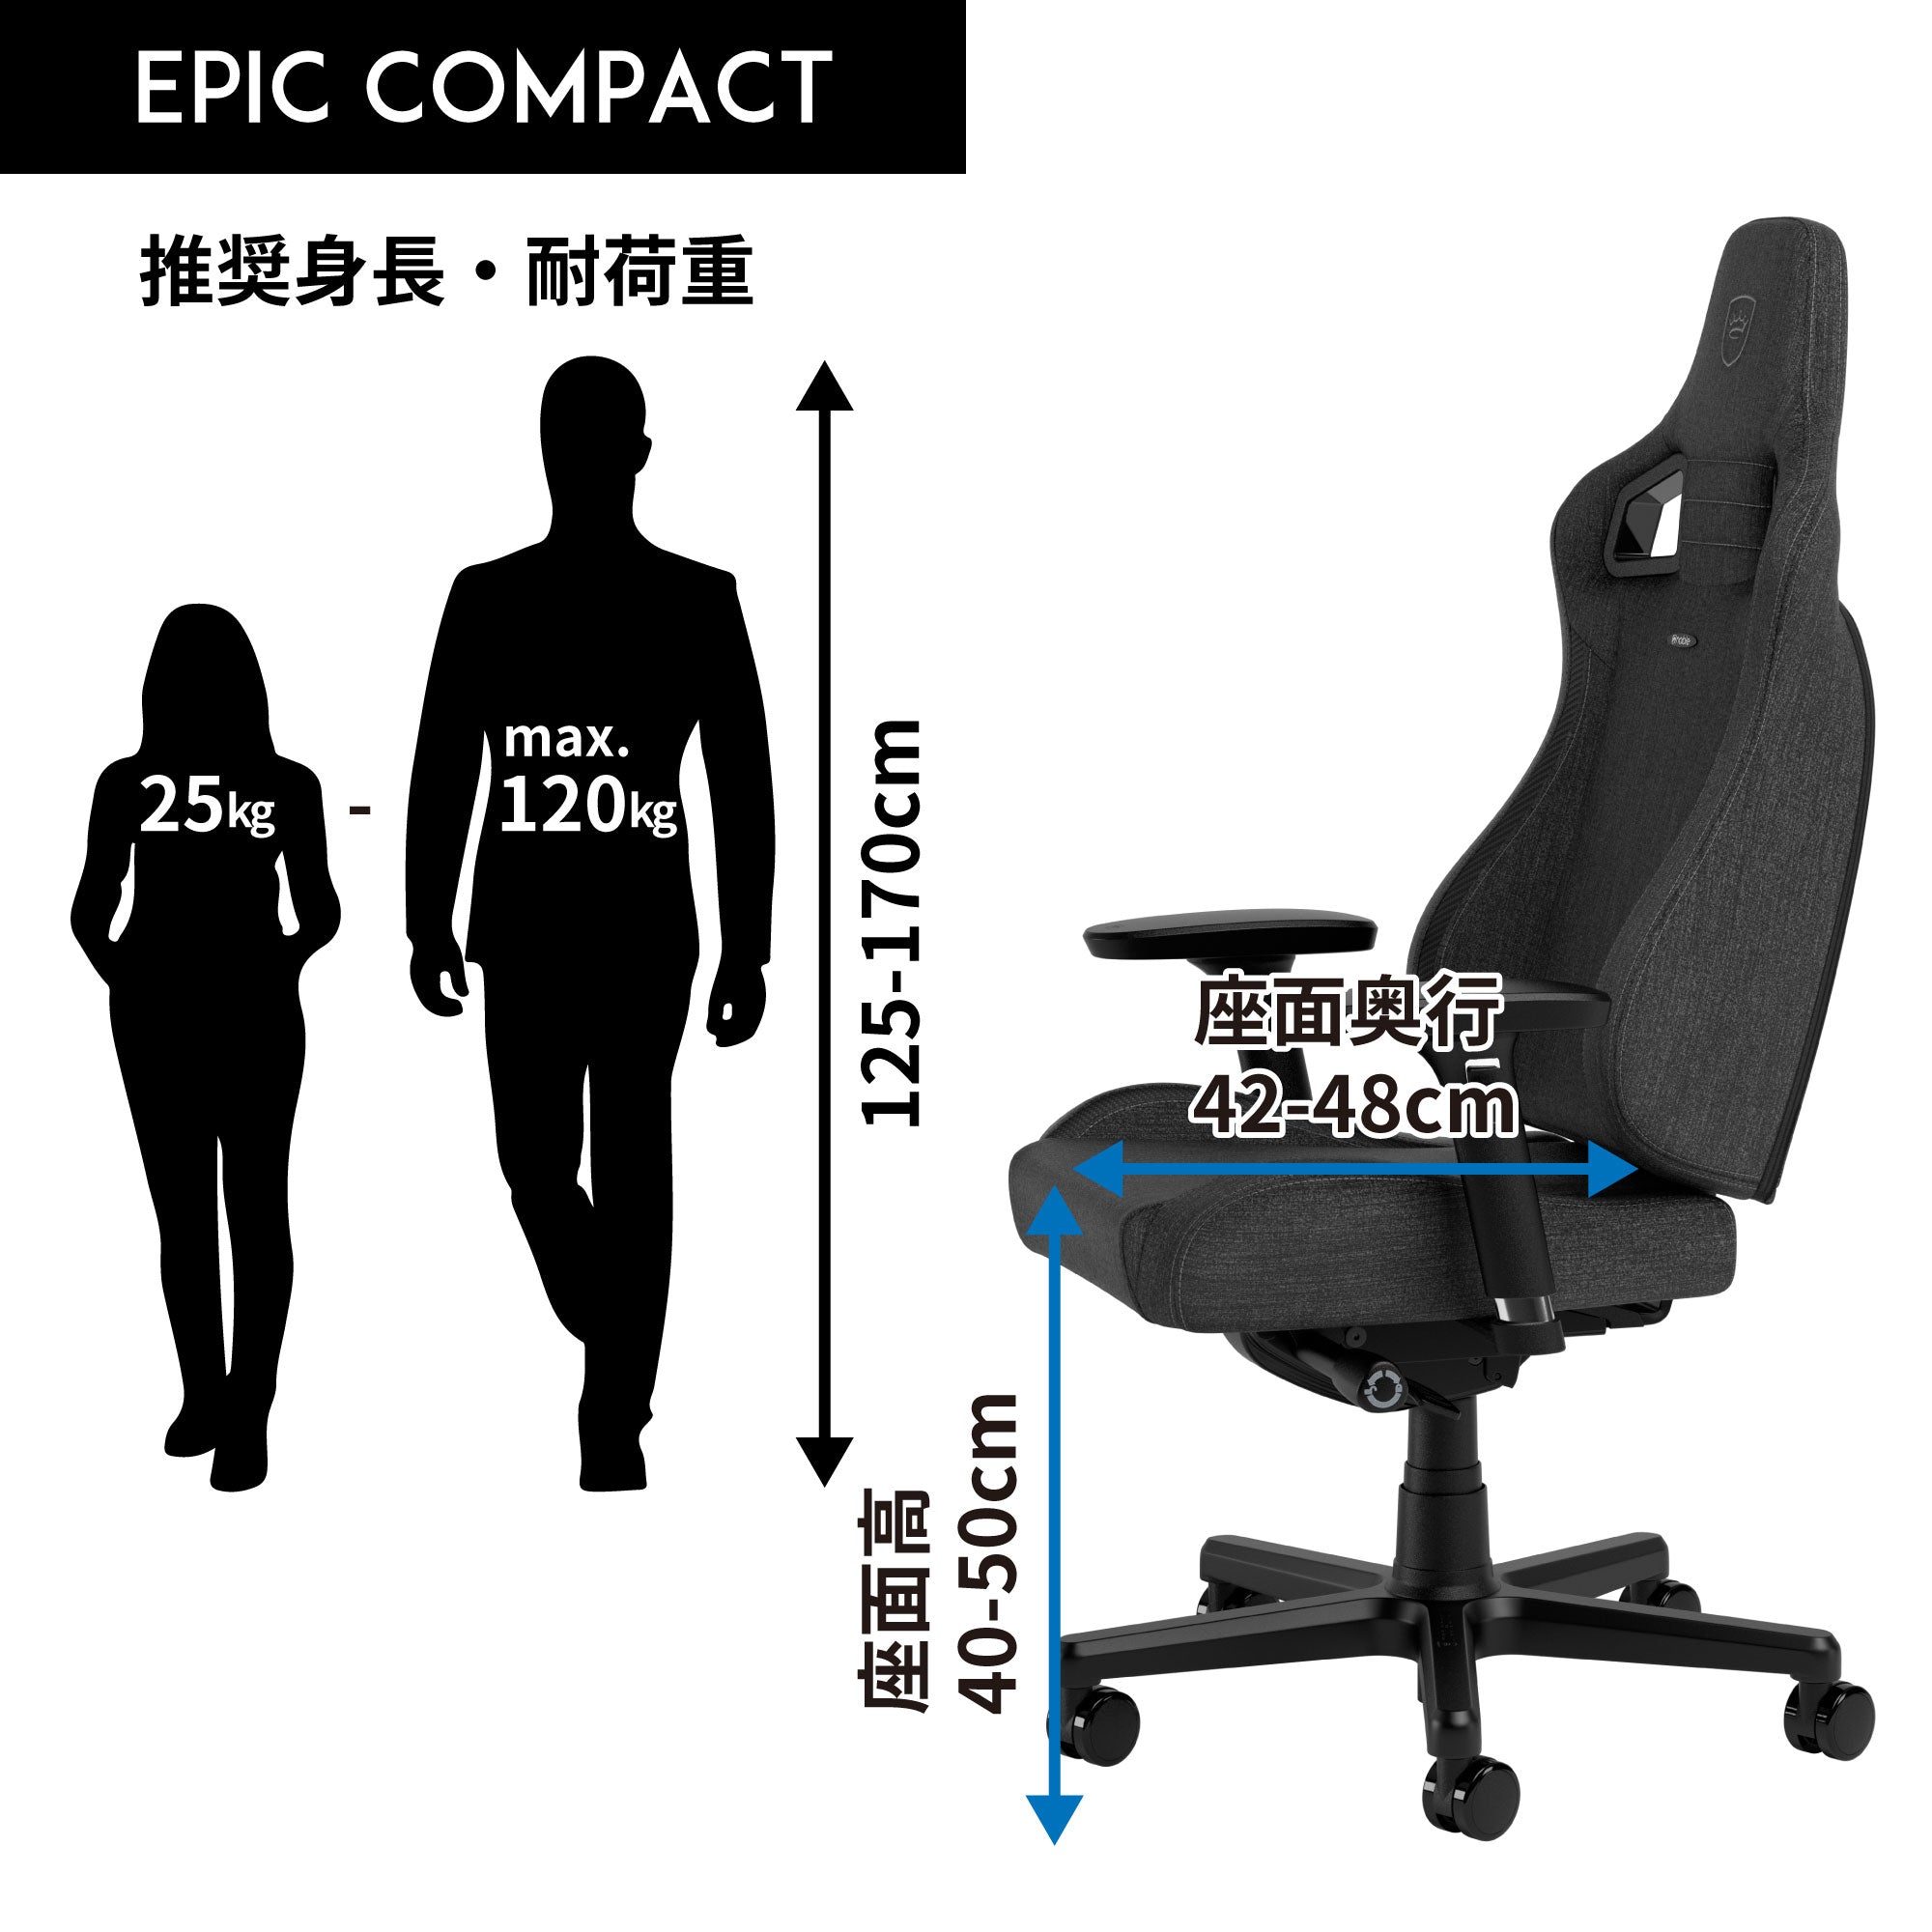 EPIC-COMPACT-SIZE-WEIGHT